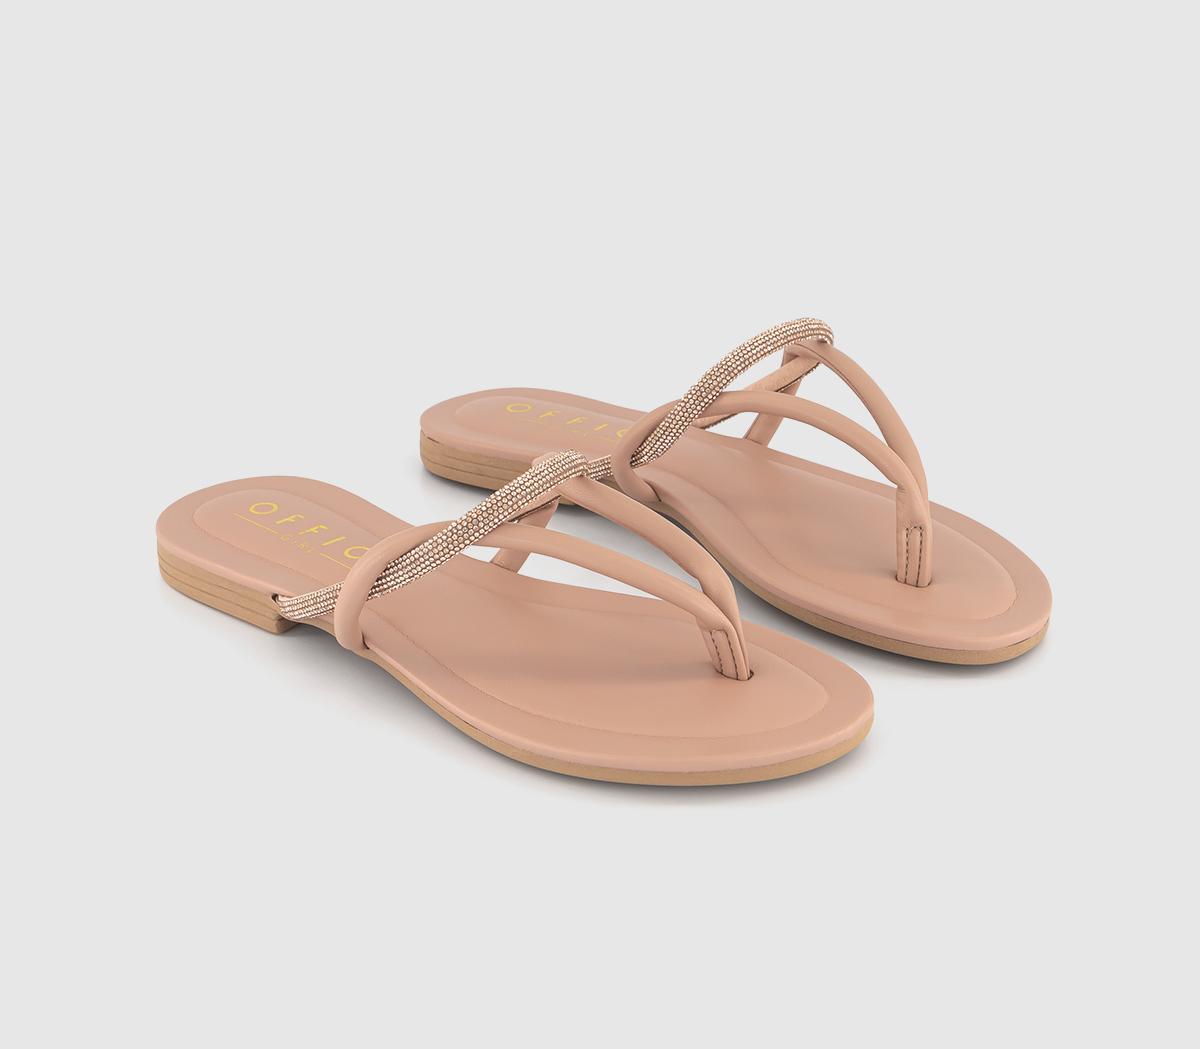 OFFICE So Cute Occasion Toe Thong Sandals Beige Leather - Women’s Sandals